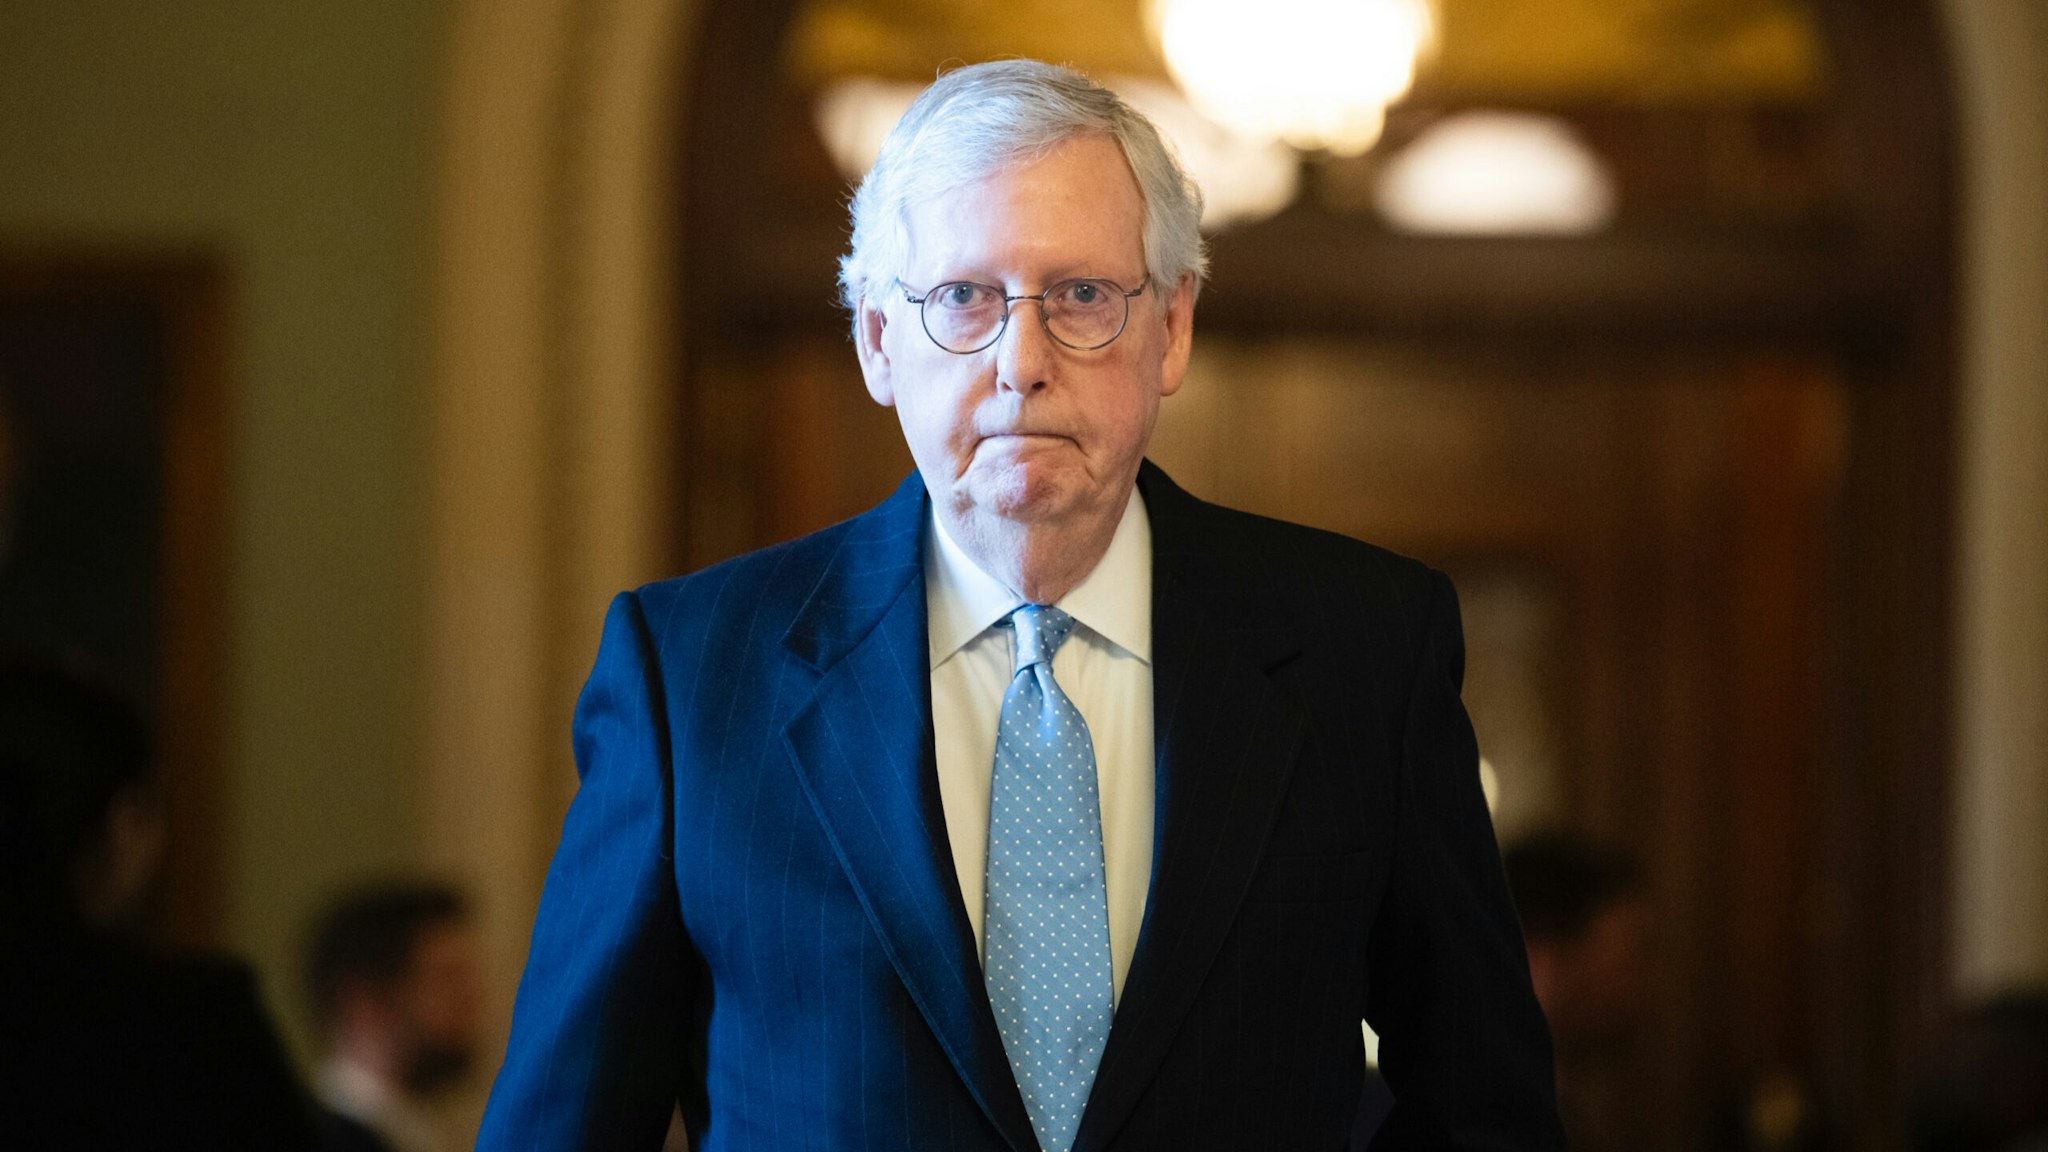 Senate Minority Leader Mitch McConnell, R-Ky., is seen in the U.S. Capitol after the senate luncheons on Tuesday, March 29, 2022.